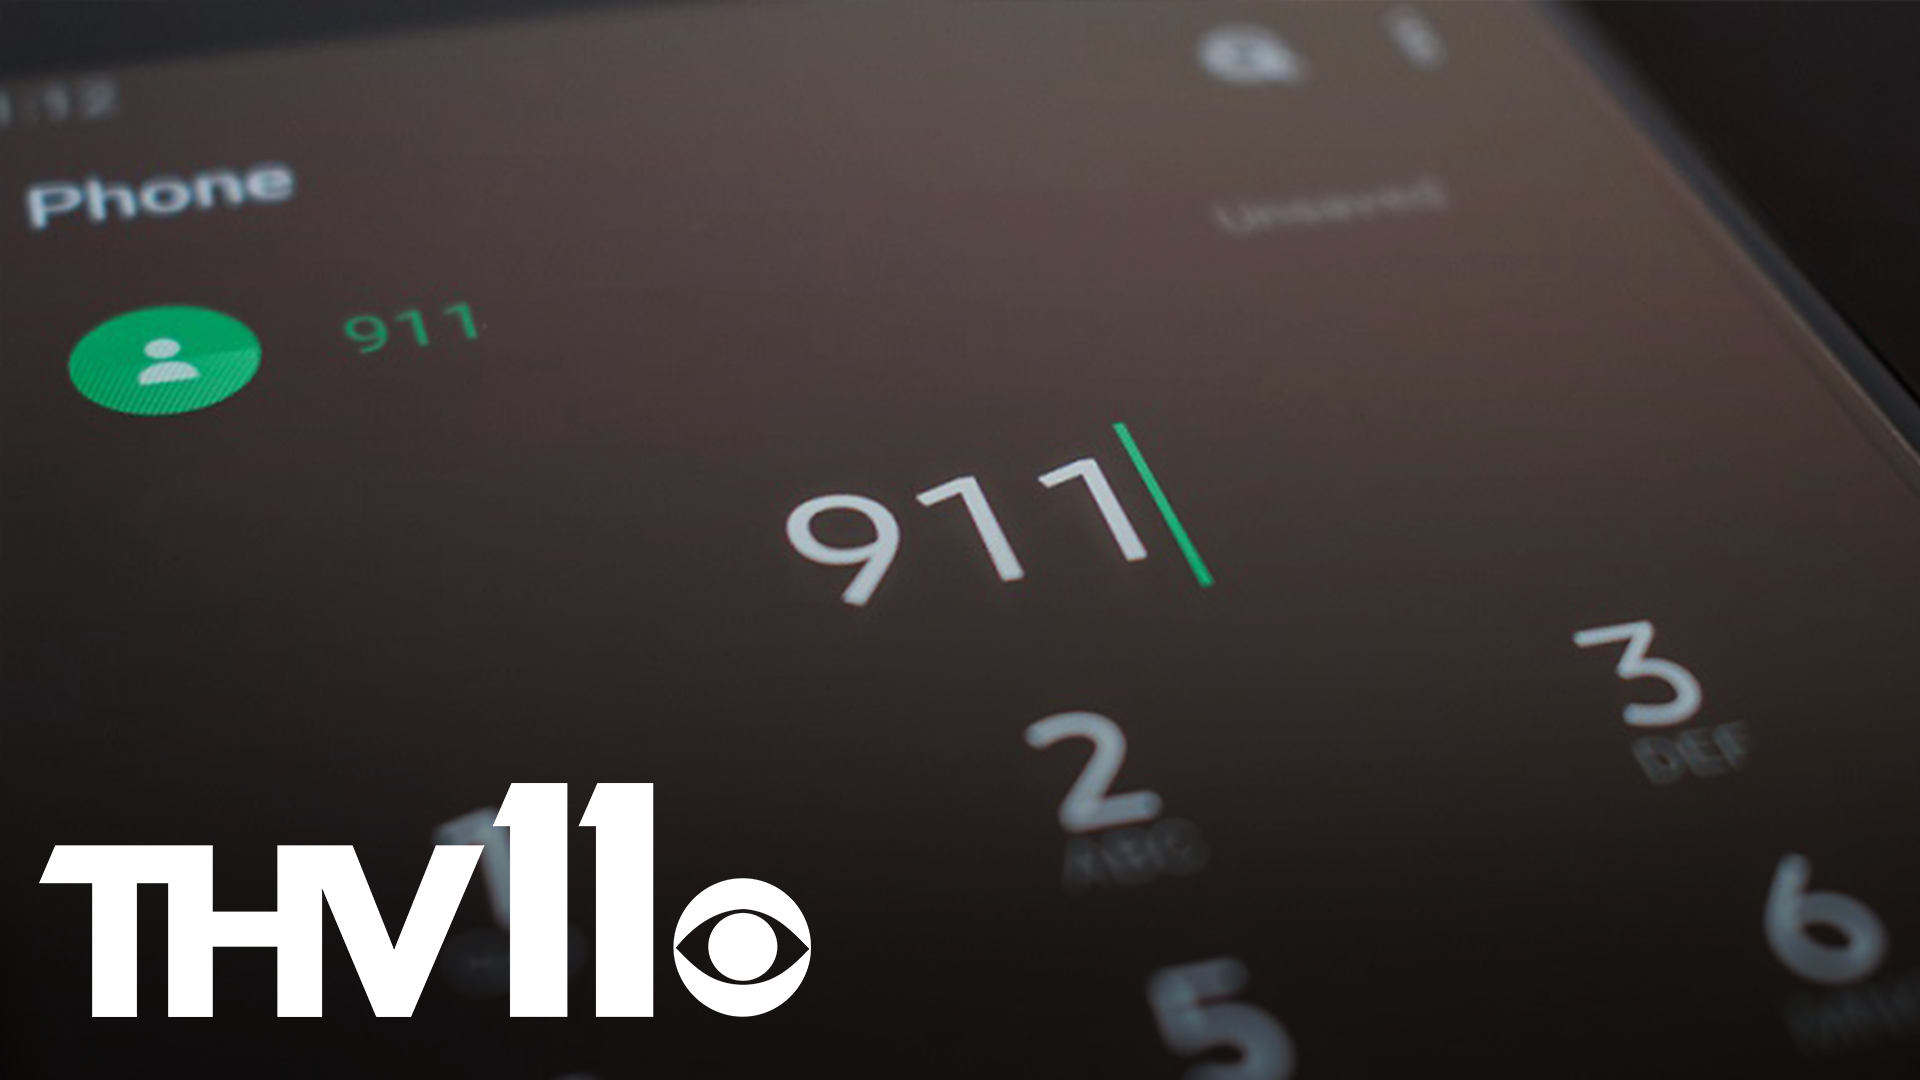 A widespread service outage affected all of Jefferson County last night. People with AT&T couldn't make or receive any calls, including to 911.